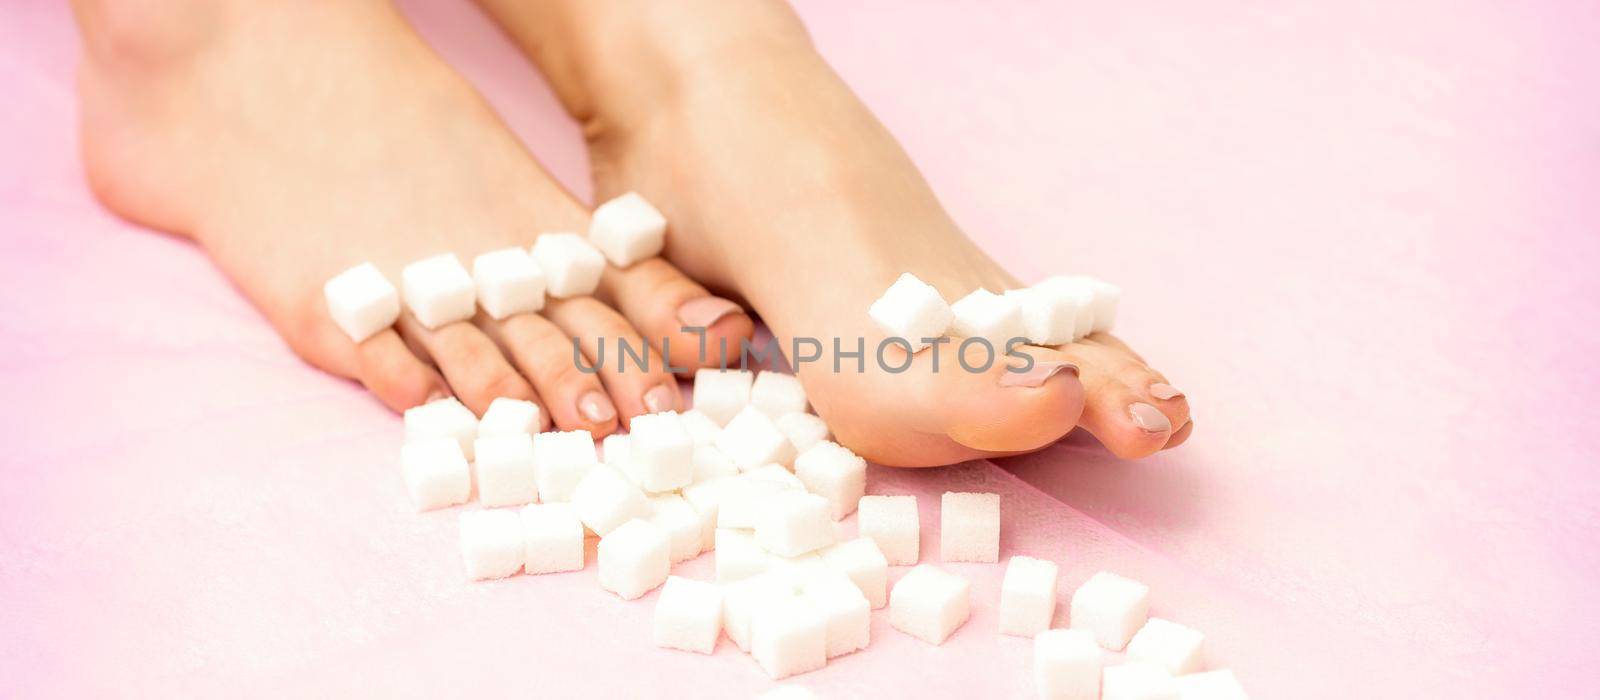 Sugar cubes lying in a row on female feet on pink background with copy space, depilation concept